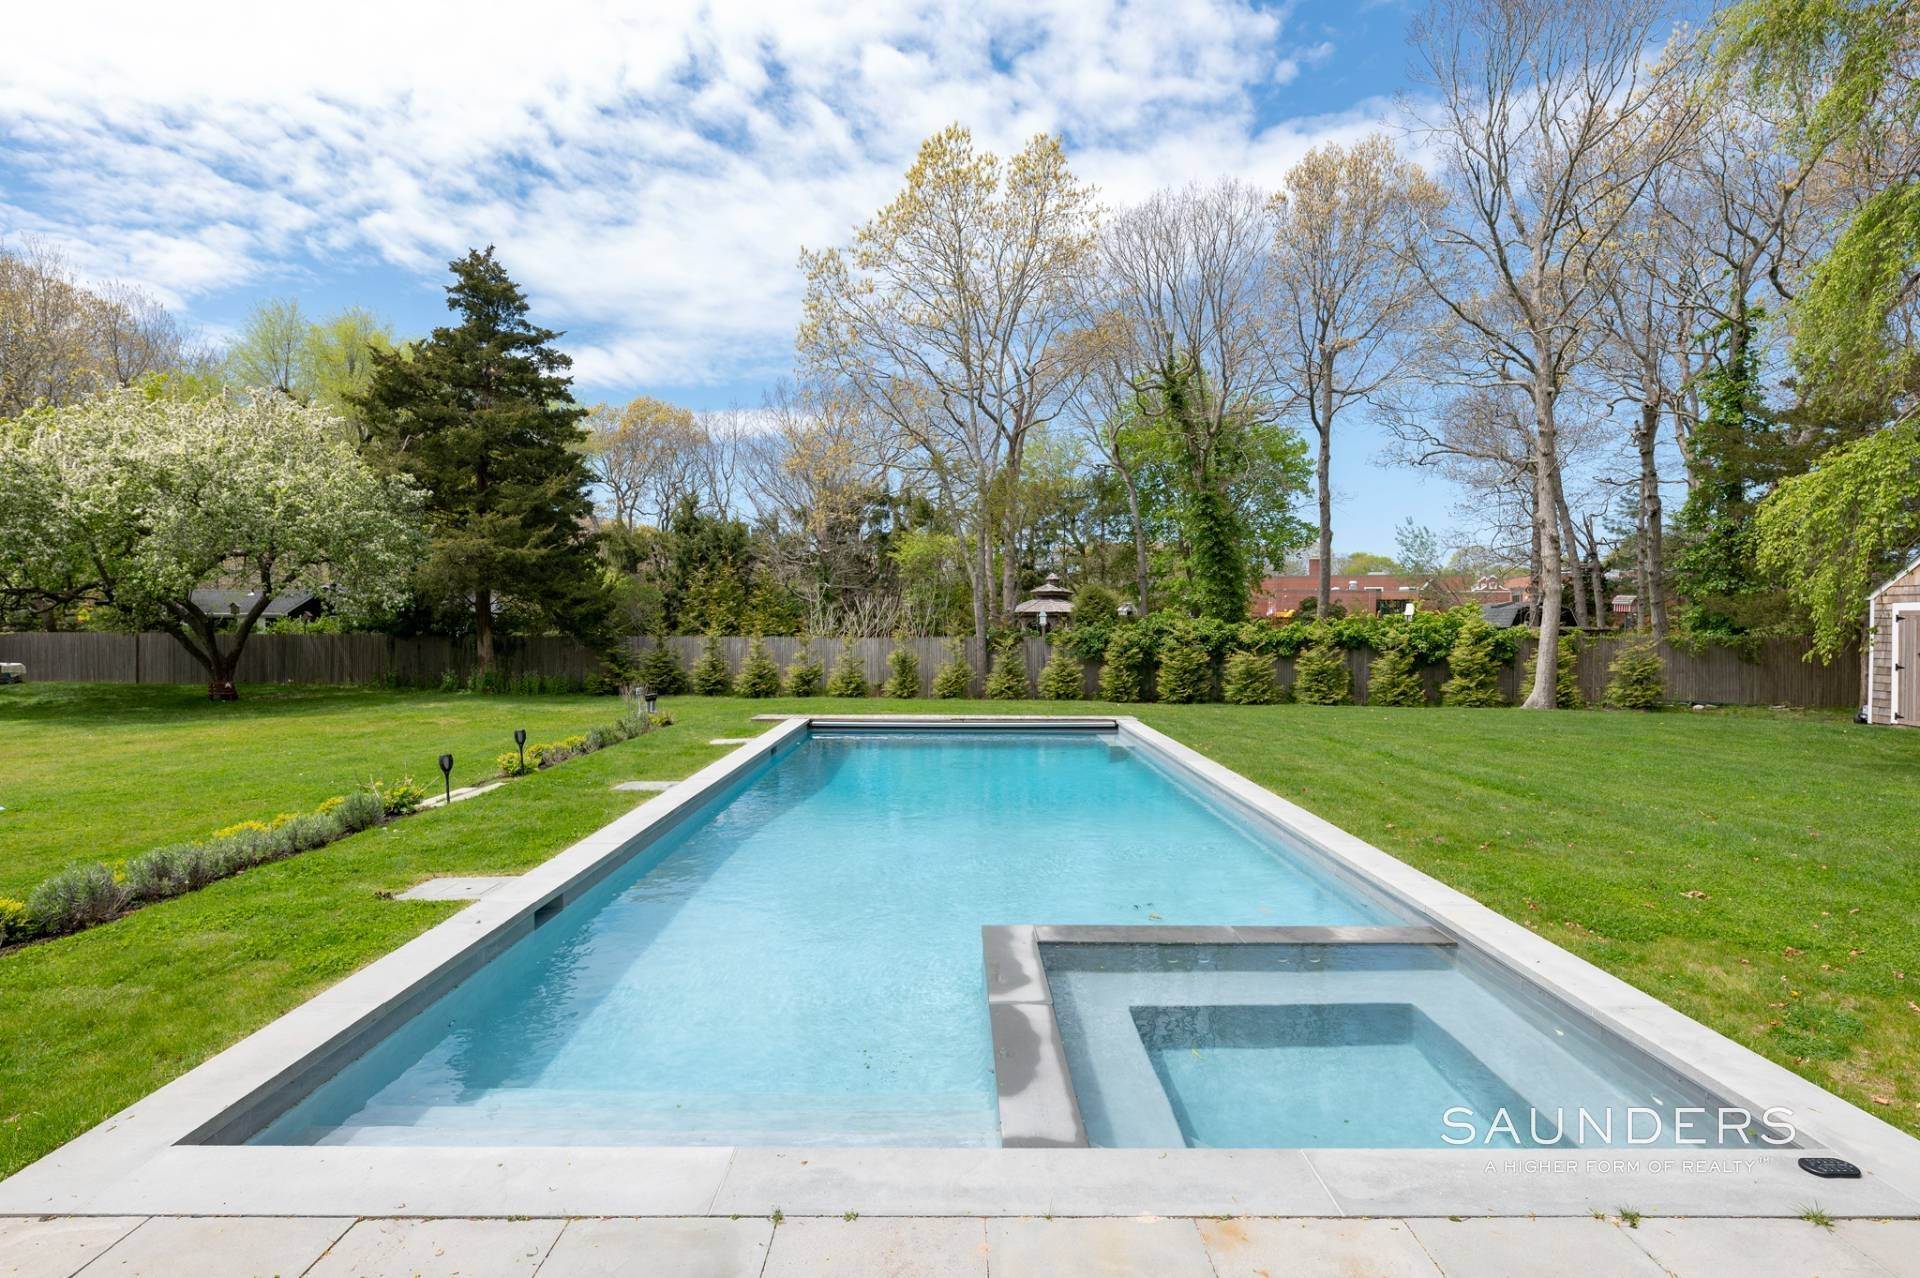 Single Family Homes at Oversized Heated Gunite Pool With Spa 109 Lewis Road, East Quogue, NY 11942